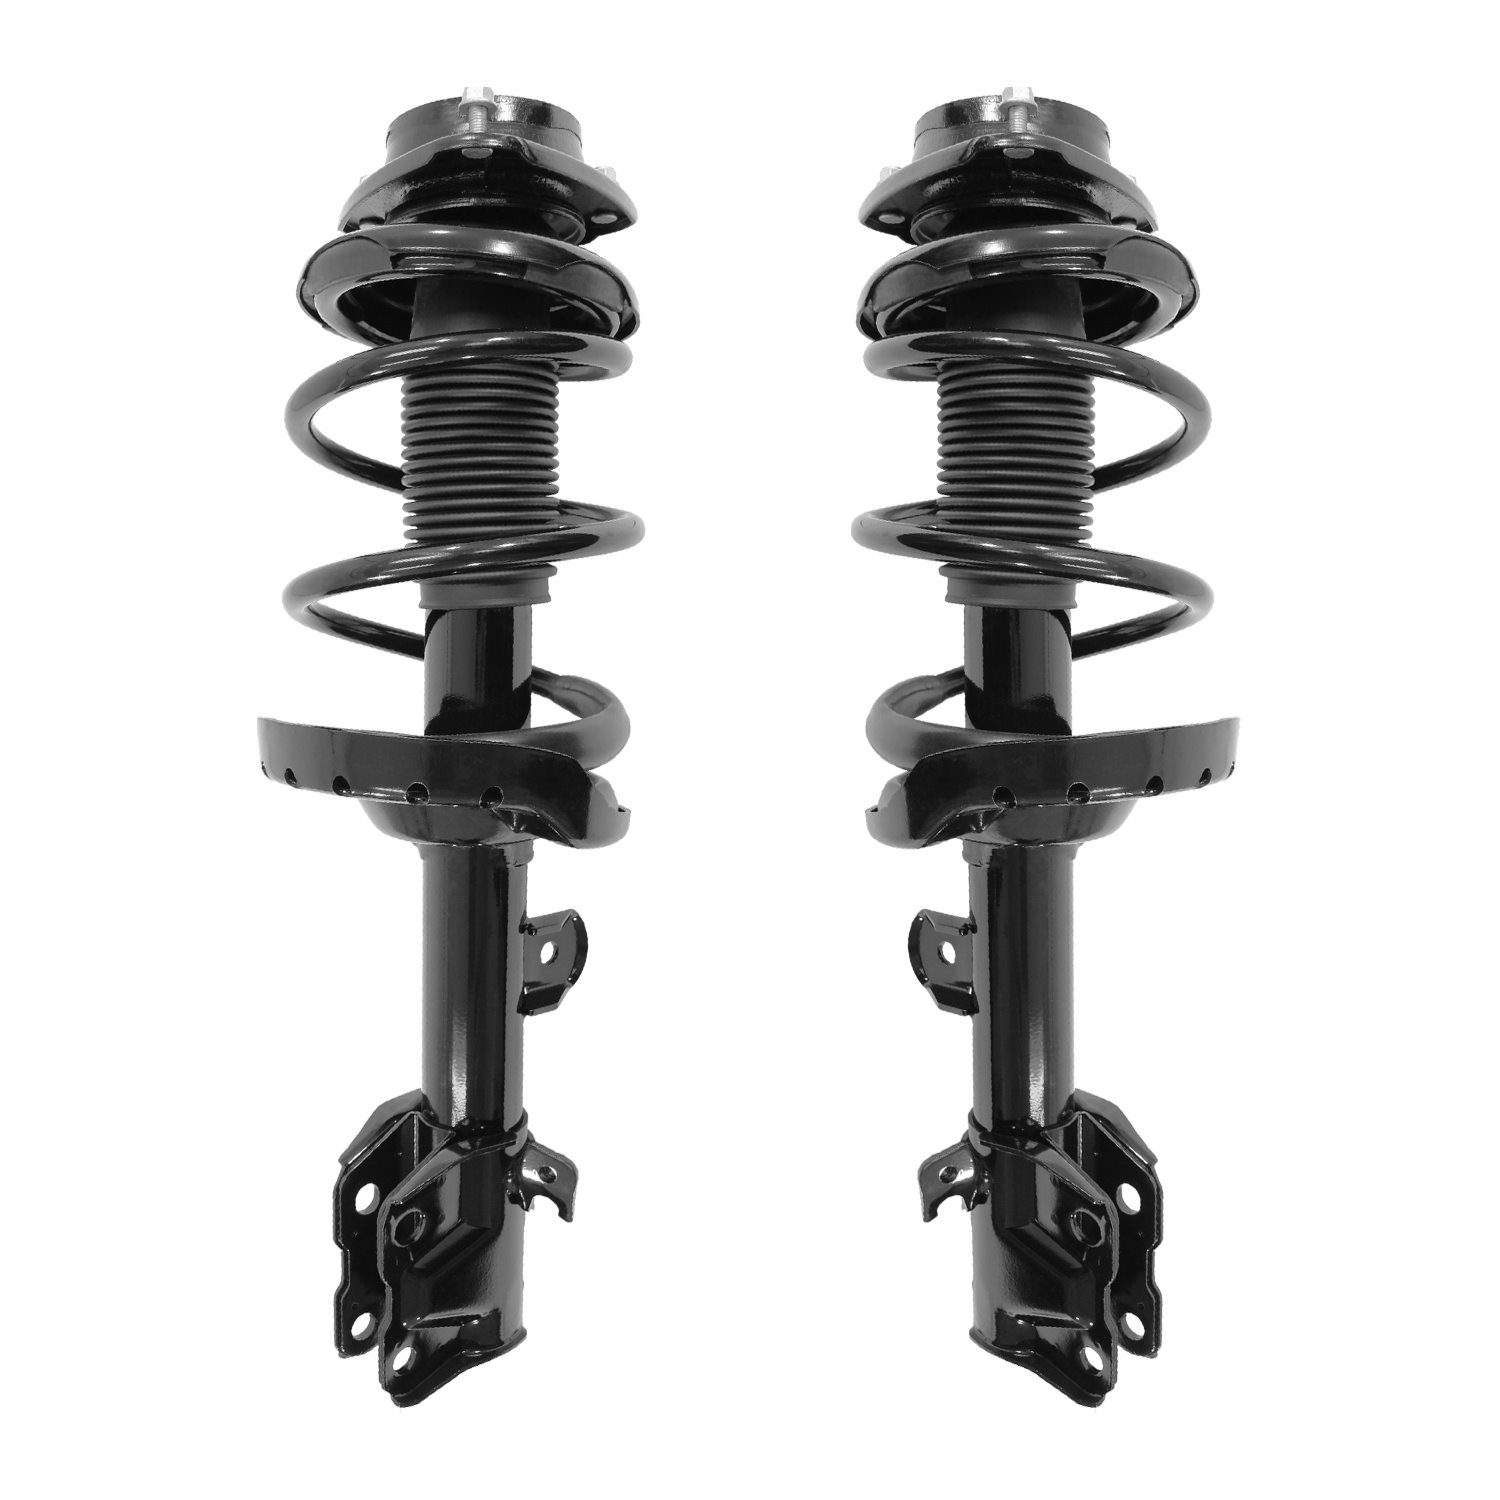 2-13371-13372-001 Front Suspension Strut & Coil Spring Assemby Set Fits Select Subaru Outback